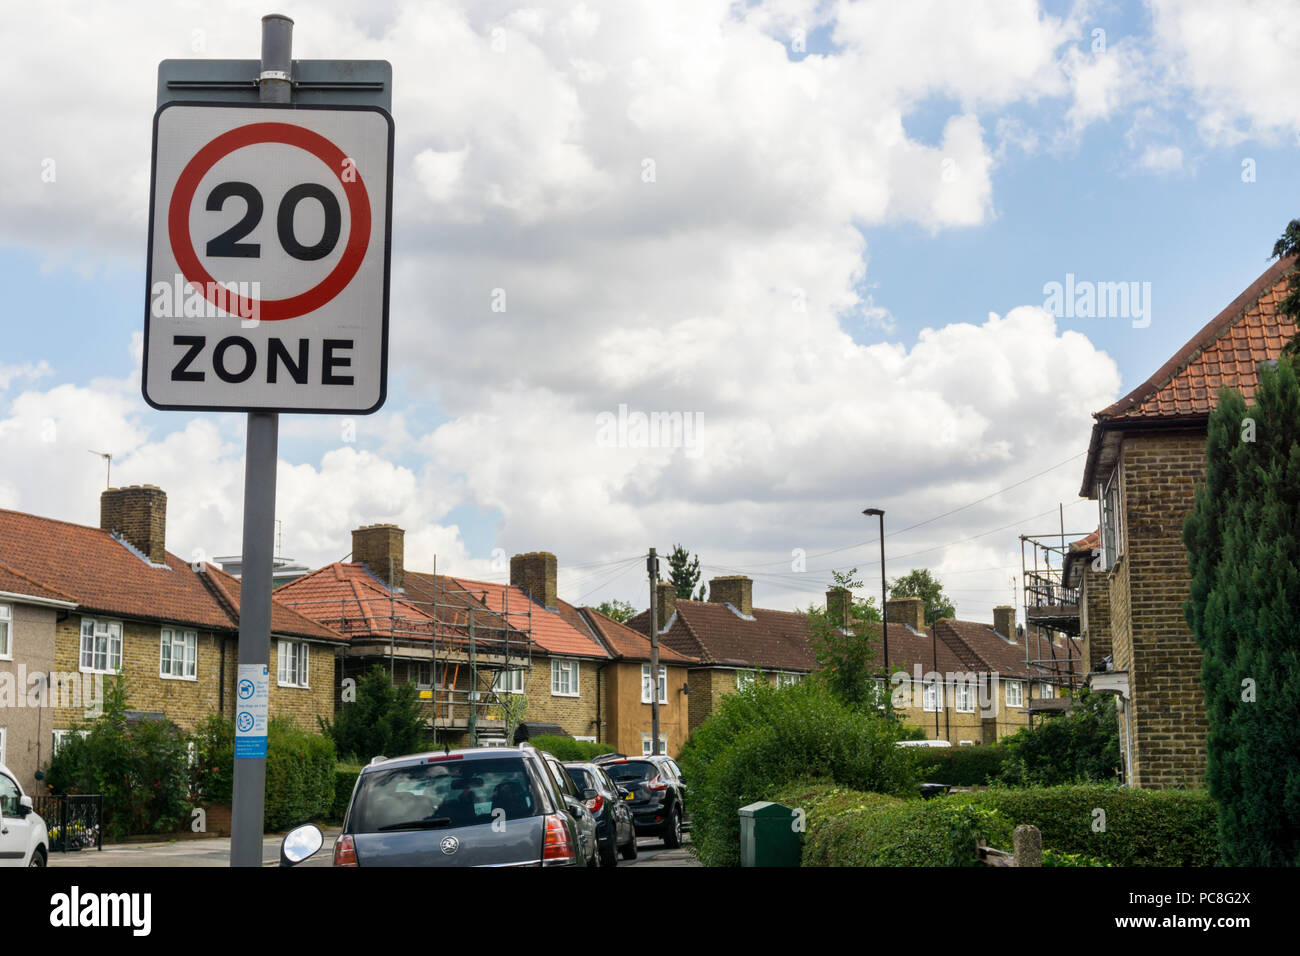 Sign for a 20 mph speed zone on the Downham Estate in Lewisham, south London. Stock Photo